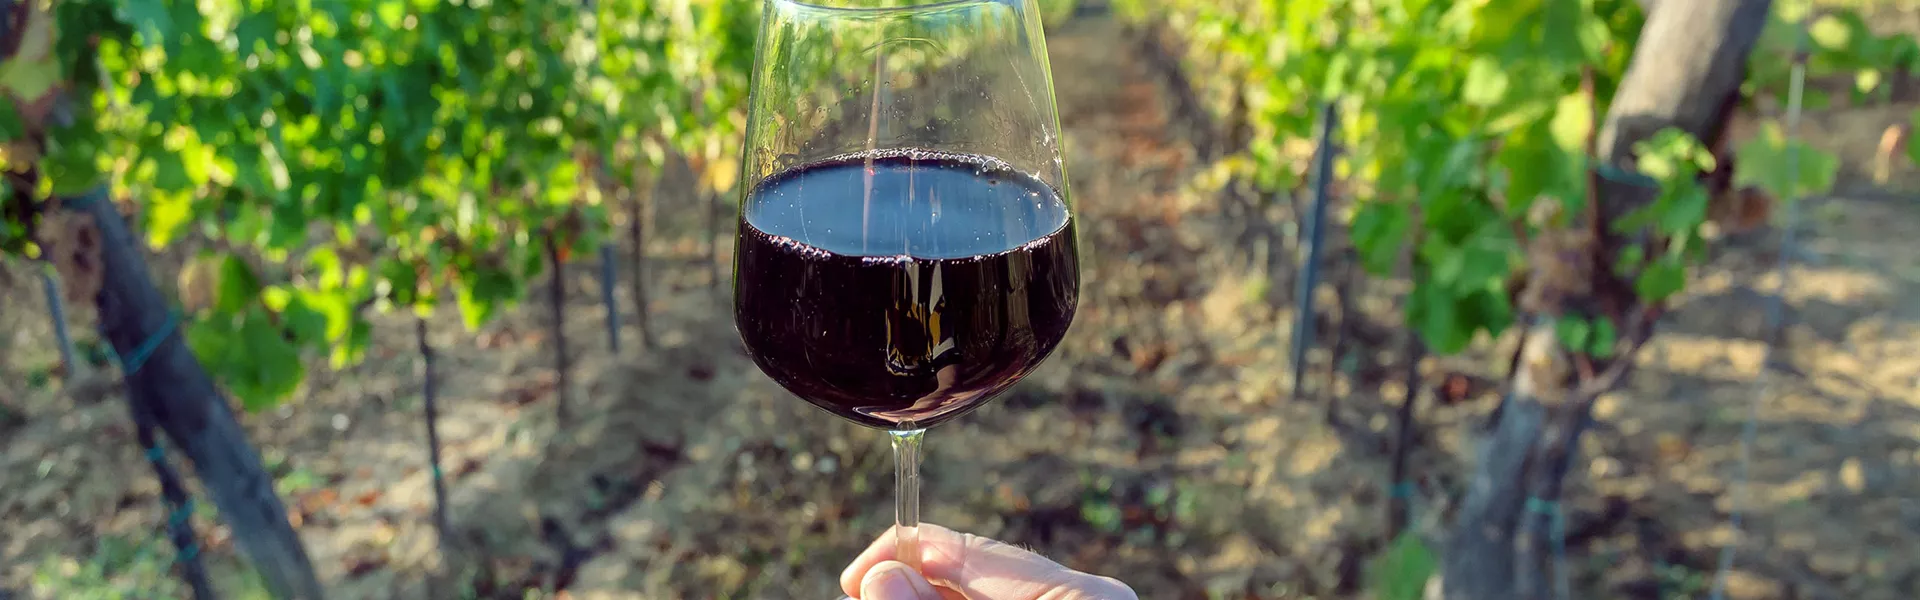 A person holding a glass of red wine in a vineyard in Chile